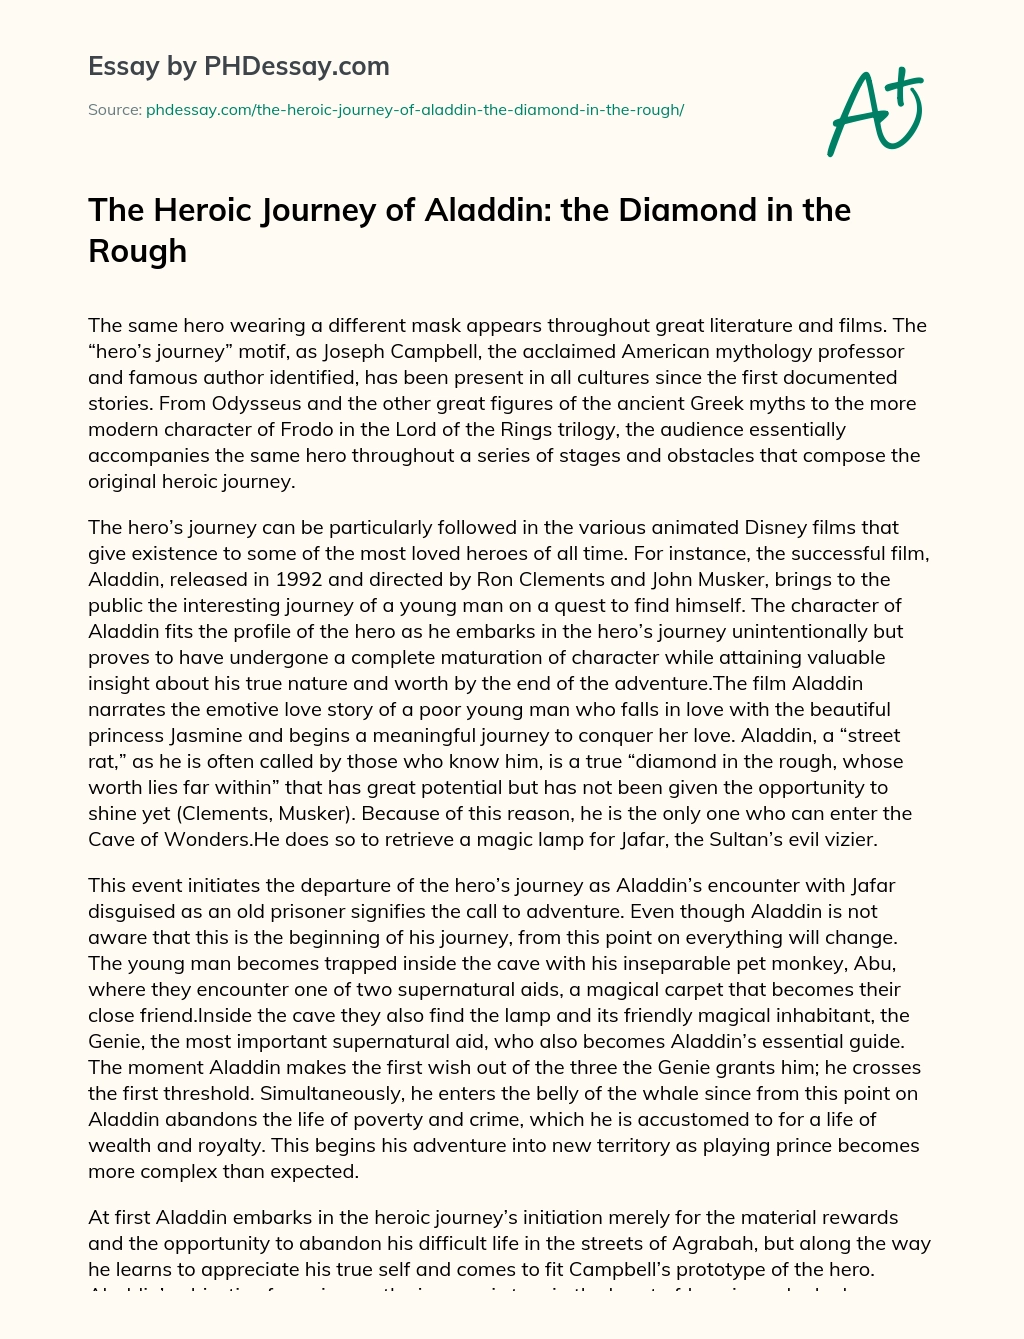 The Heroic Journey of Aladdin: the Diamond in the Rough essay